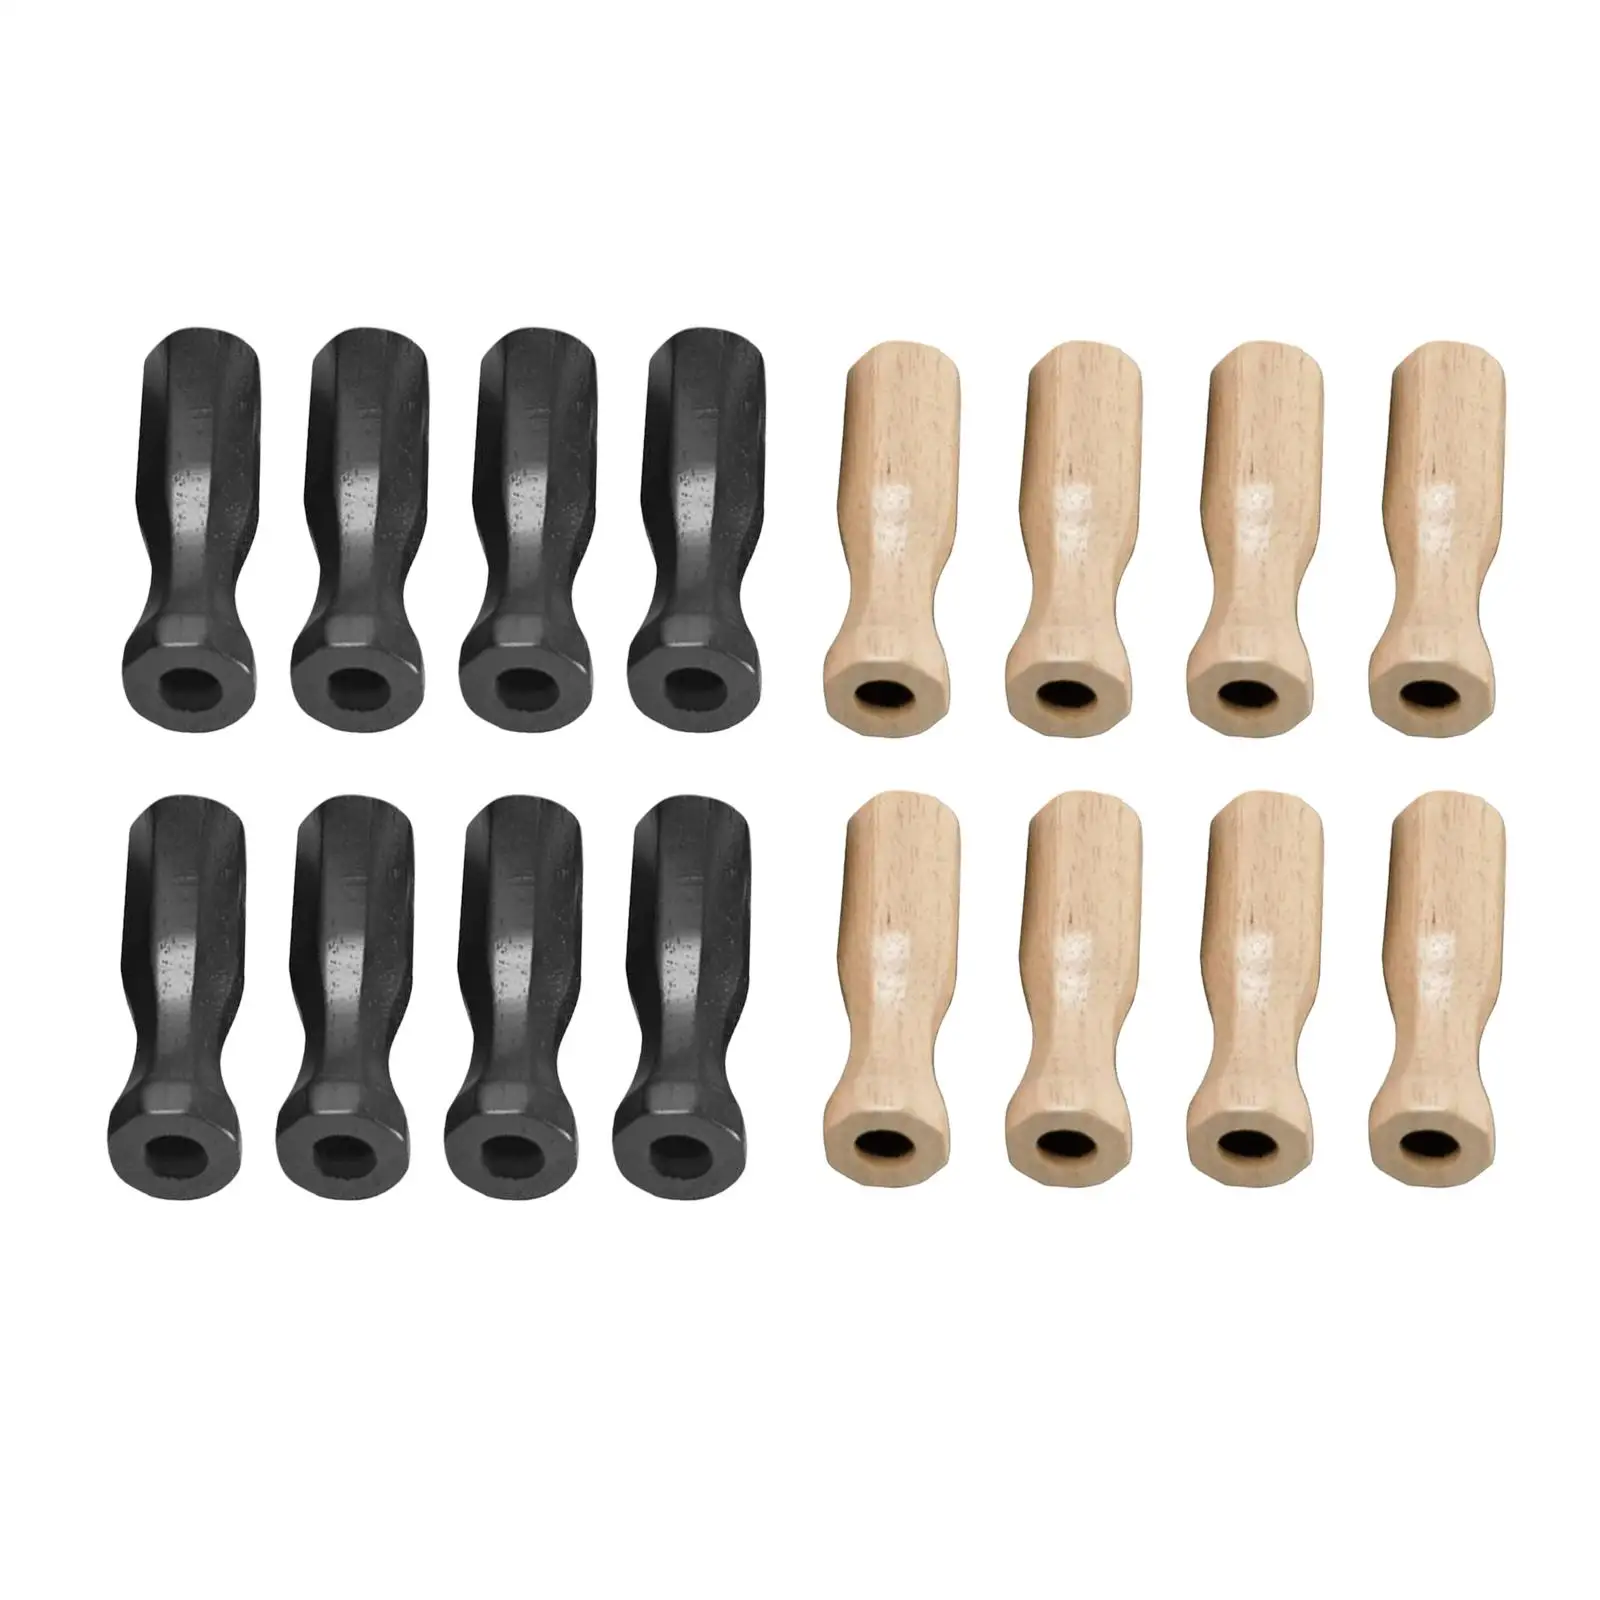 8Pcs Soccer Table Handles Portable Replacements for Child Standard Foosball Tables Foosball Accessories Soccer Machine Indoor